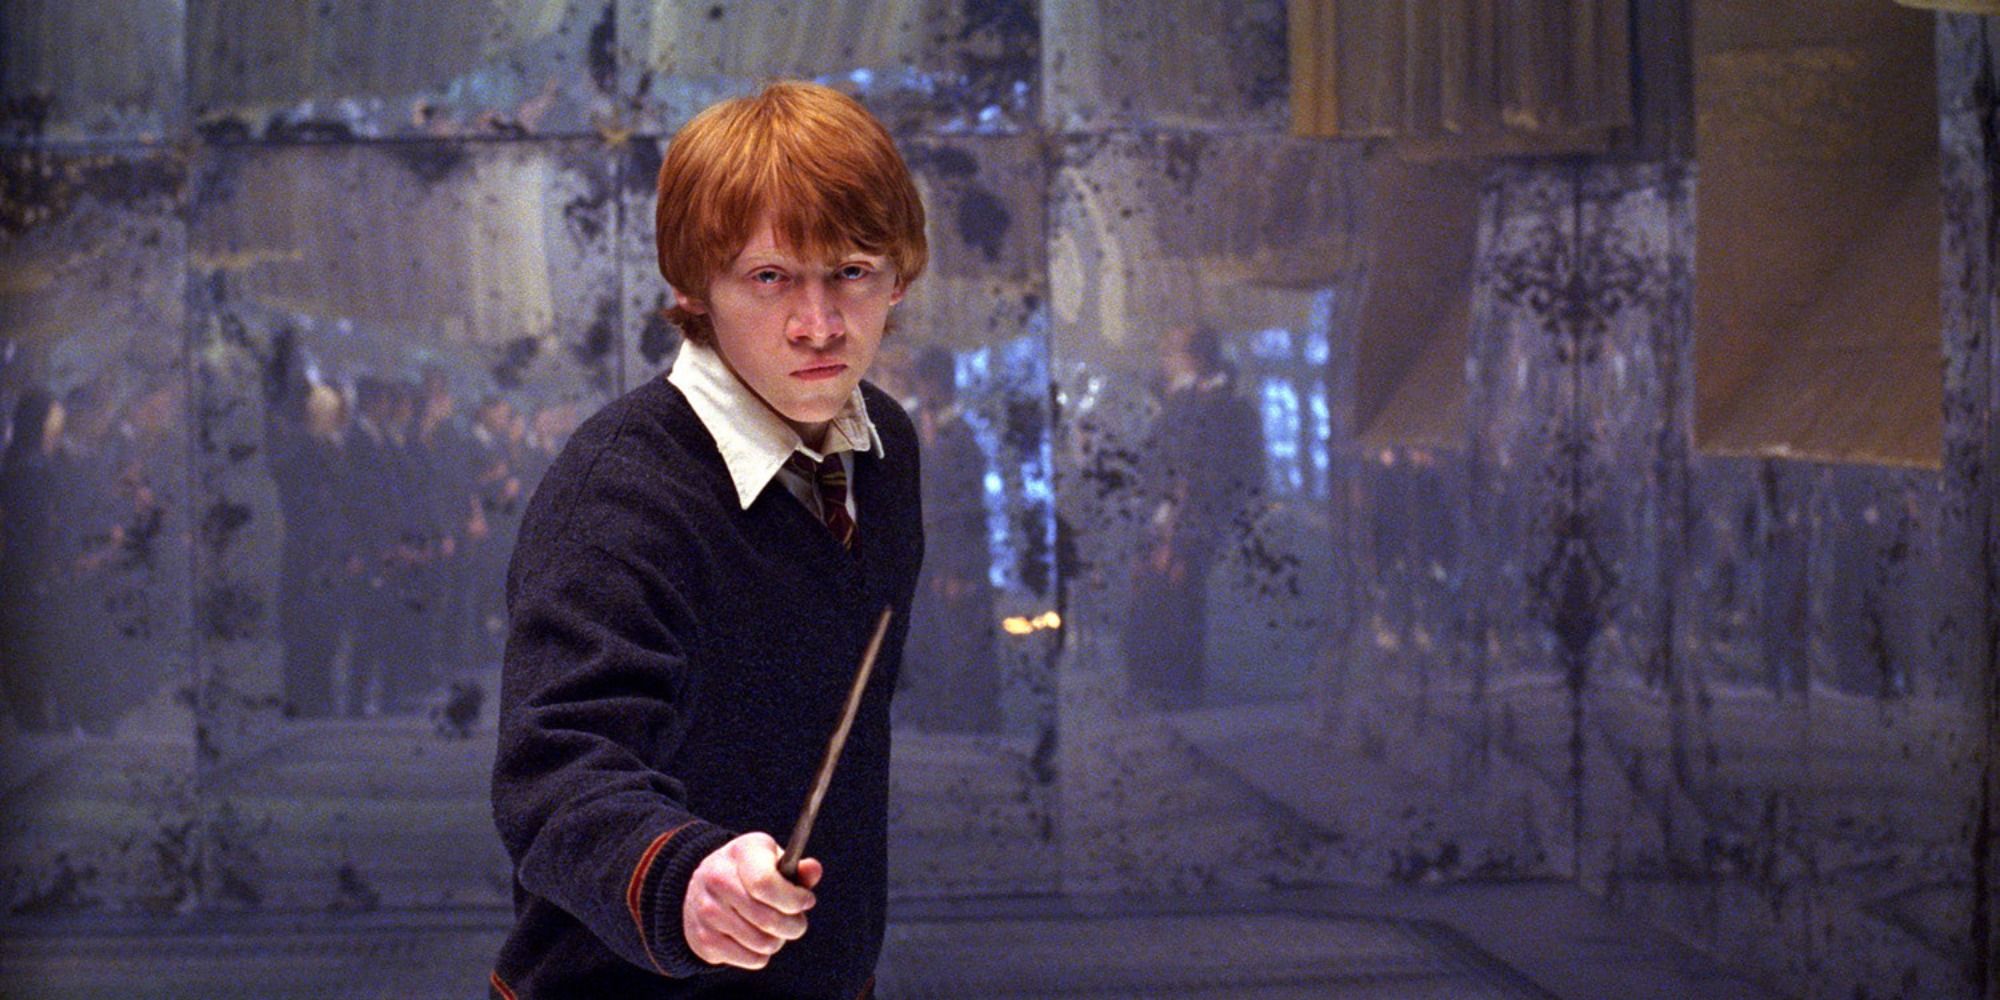 He could see Ron Weasley raising his wand and looking determined in Harry Potter and the Order of the Phoenix